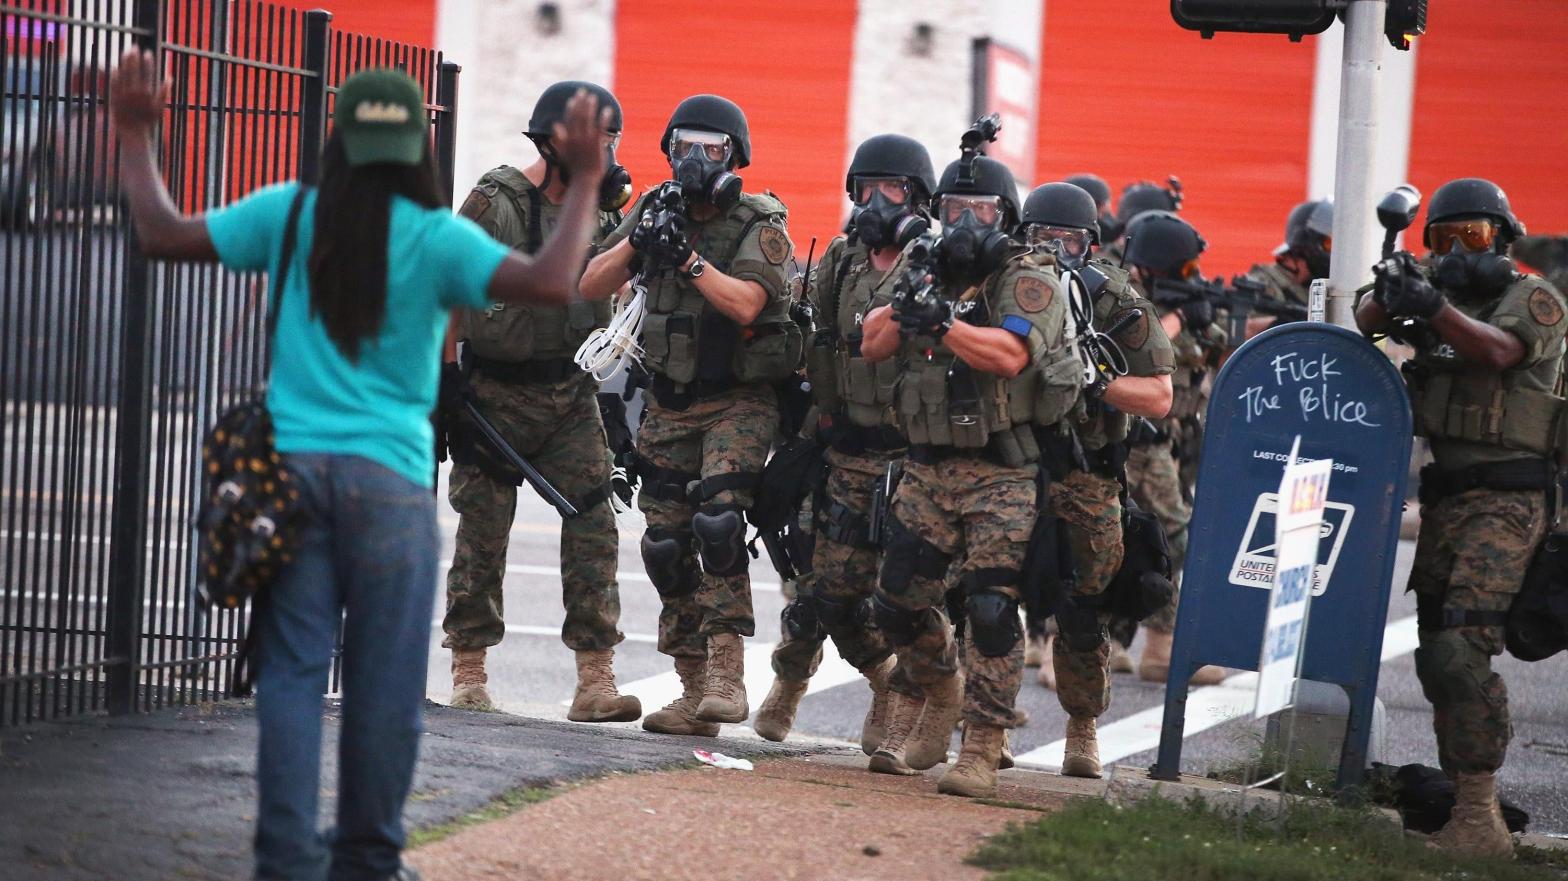 Police force protestors from the business district into nearby neighbourhoods on August 11, 2014 in Ferguson, Missouri following the killing of Michael Brown at the hands of police. (Photo: Scott Olson, Getty Images)